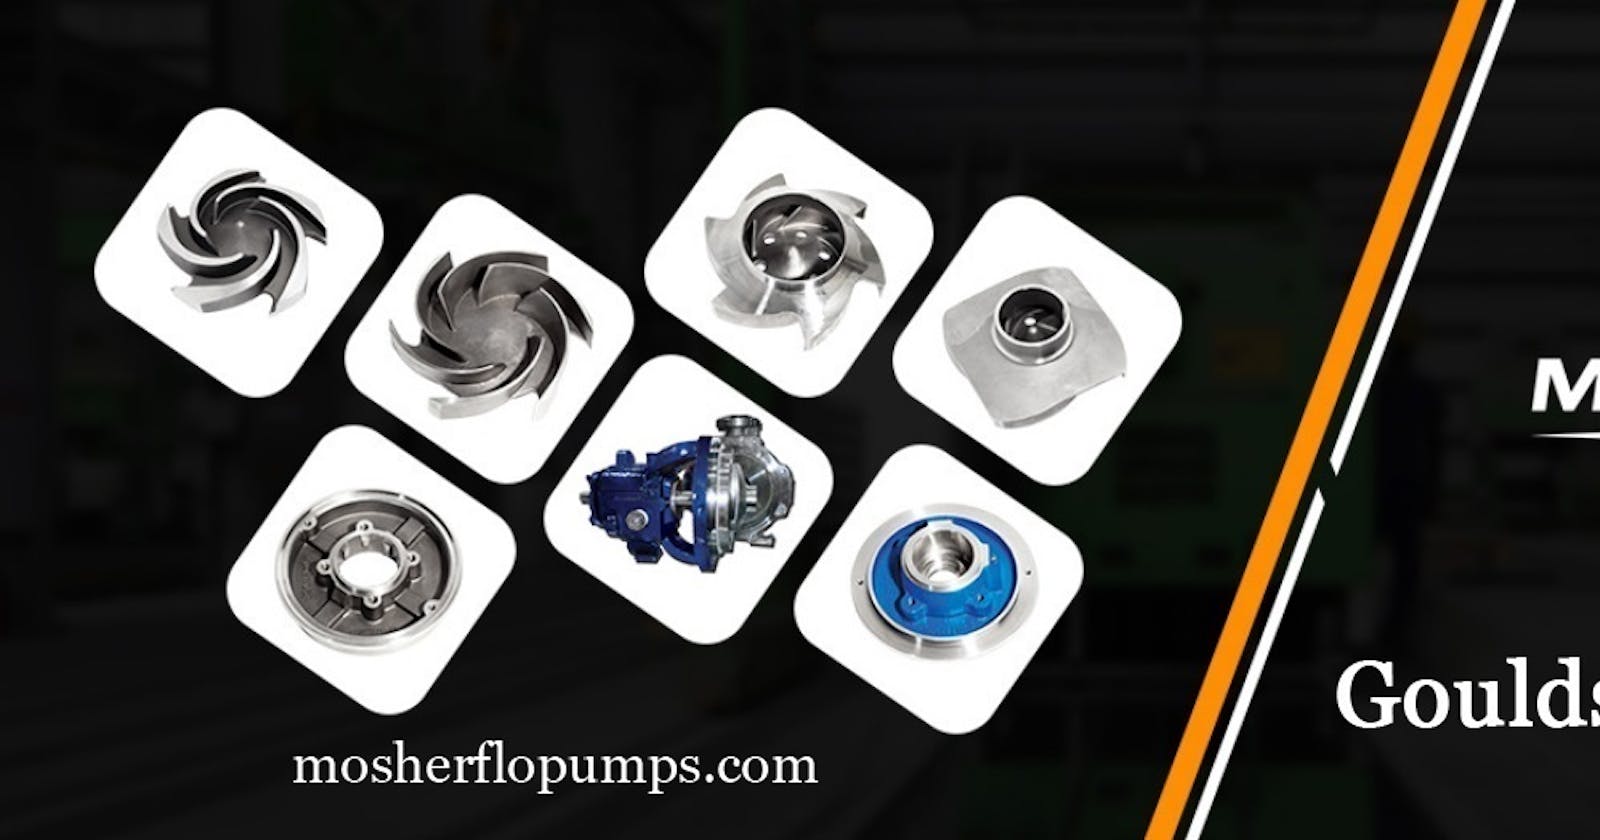 Find High-Quality Goulds Pump Parts for Efficient Performance